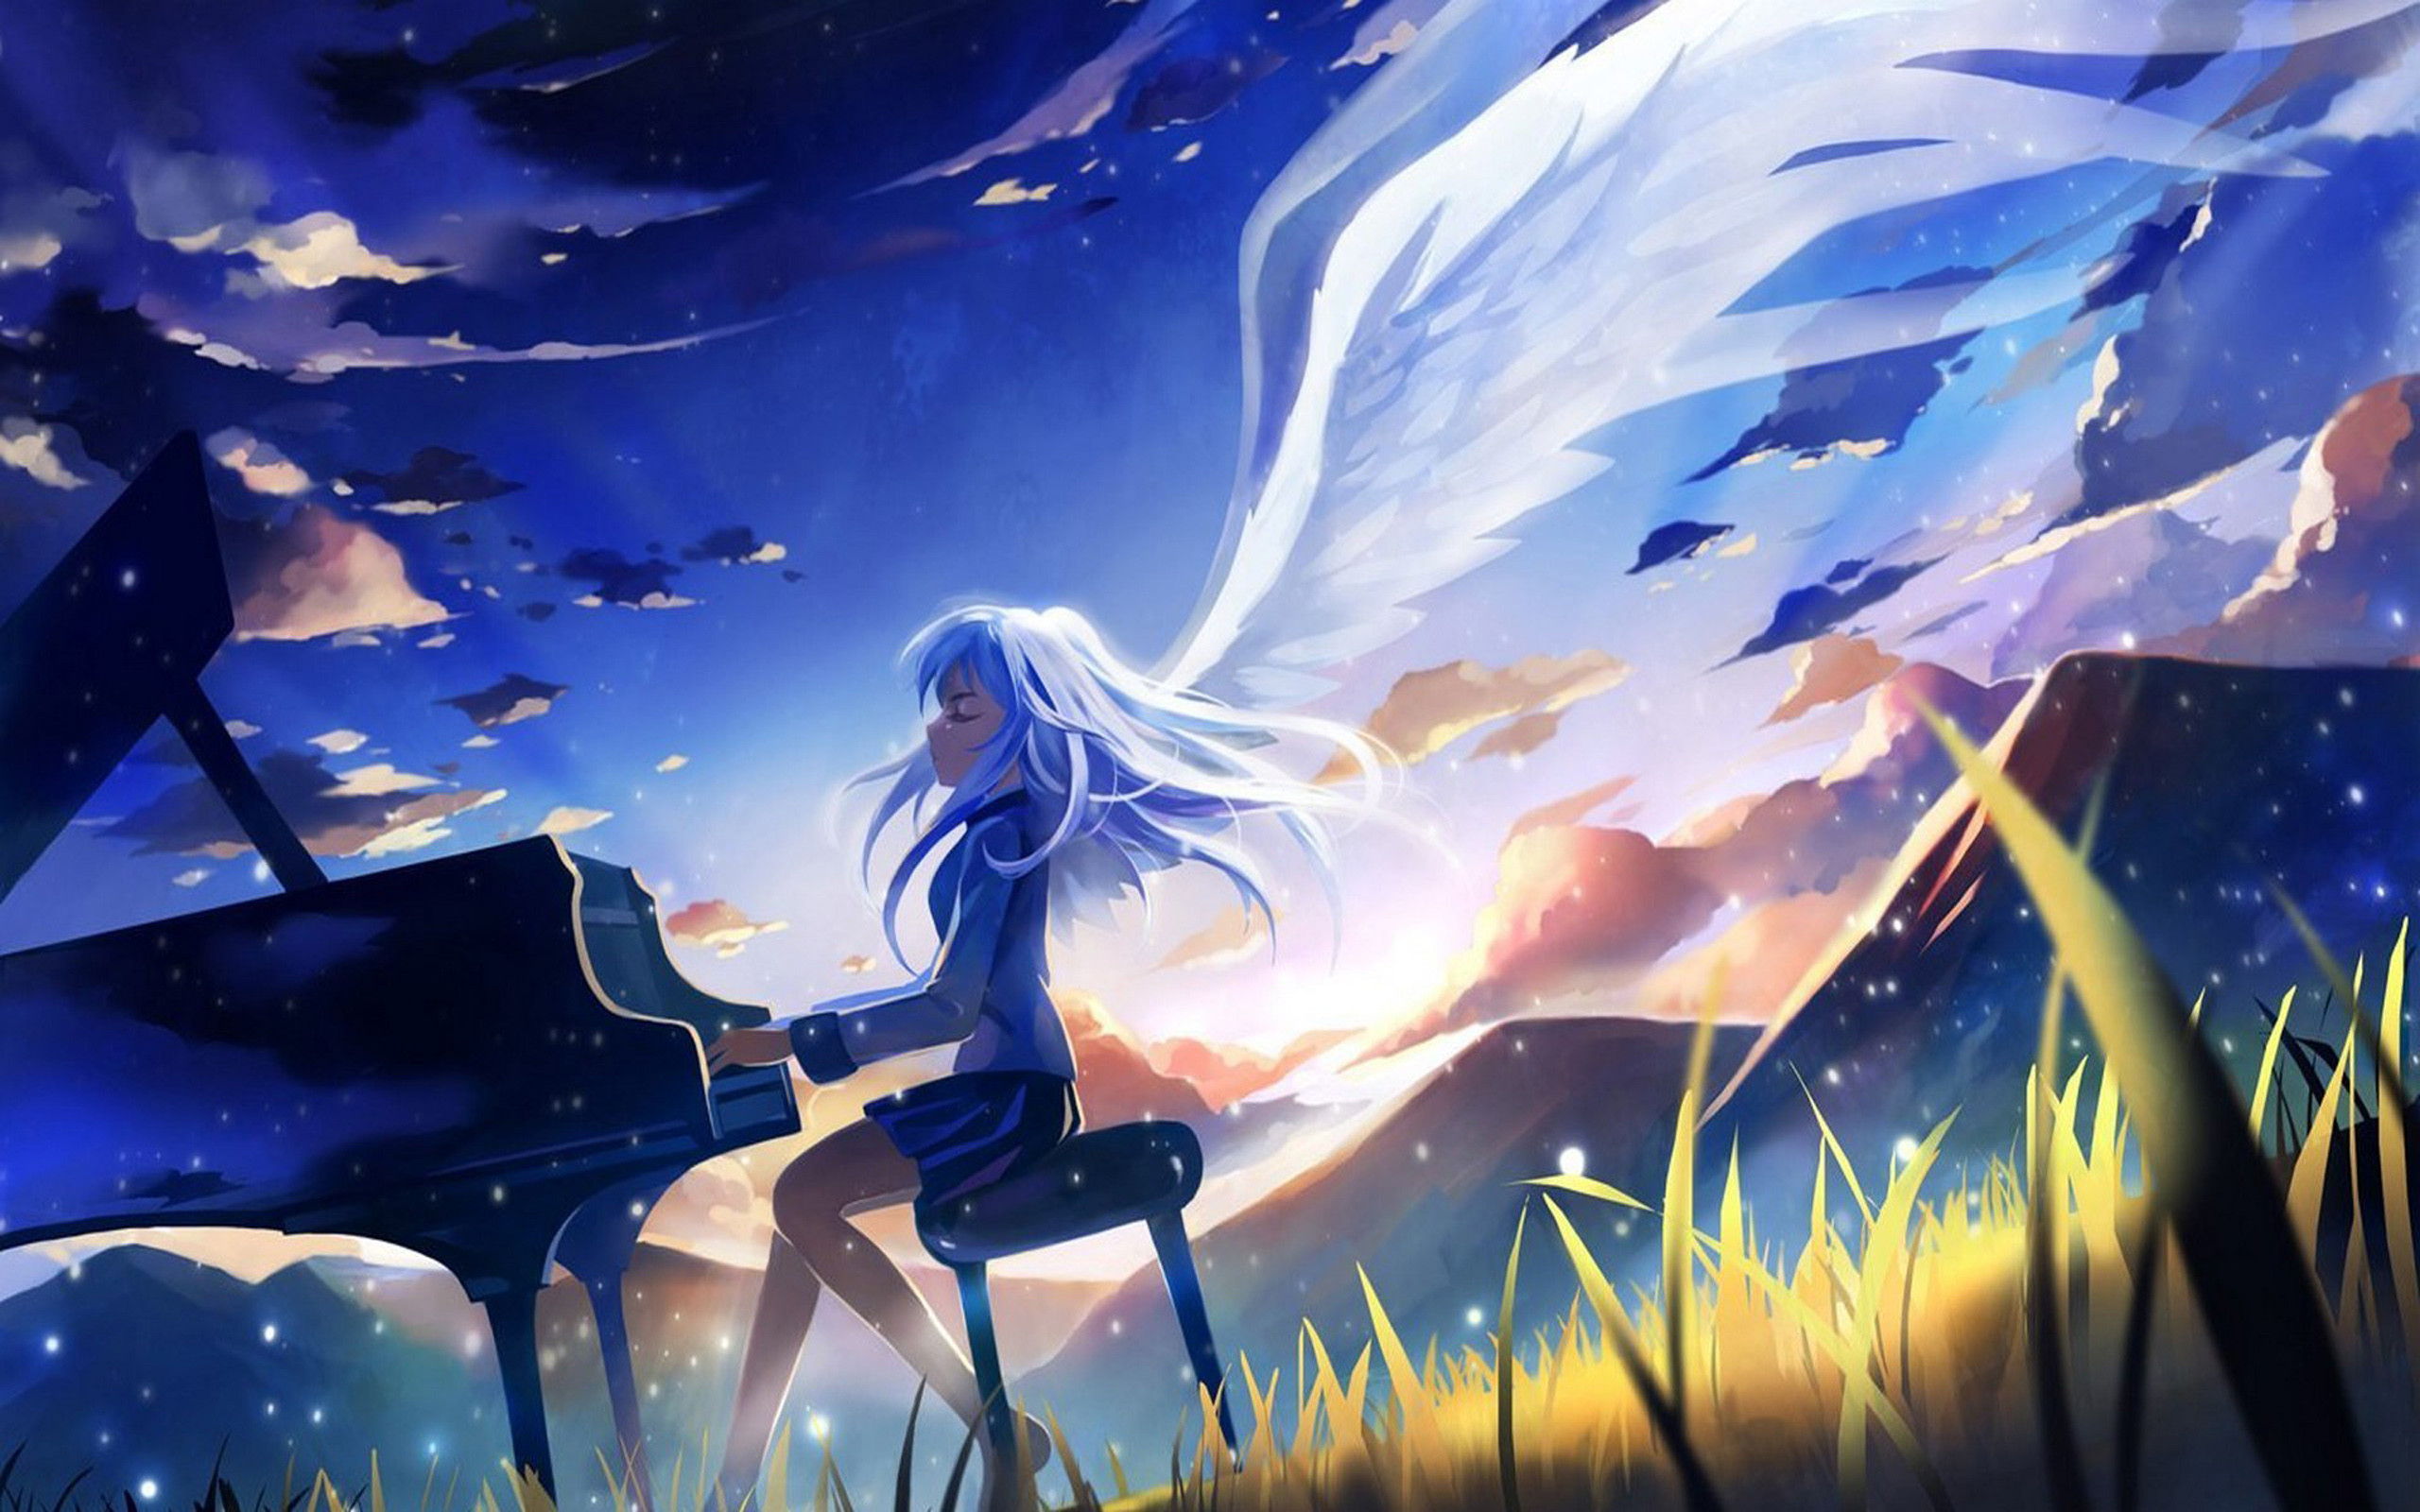 2560x1600 Anime Angels Wallpapers Download Angels wallpaper angel | HD Wallpapers |  Pinterest | Angel wallpaper, Dark angel wallpaper and Anime angel